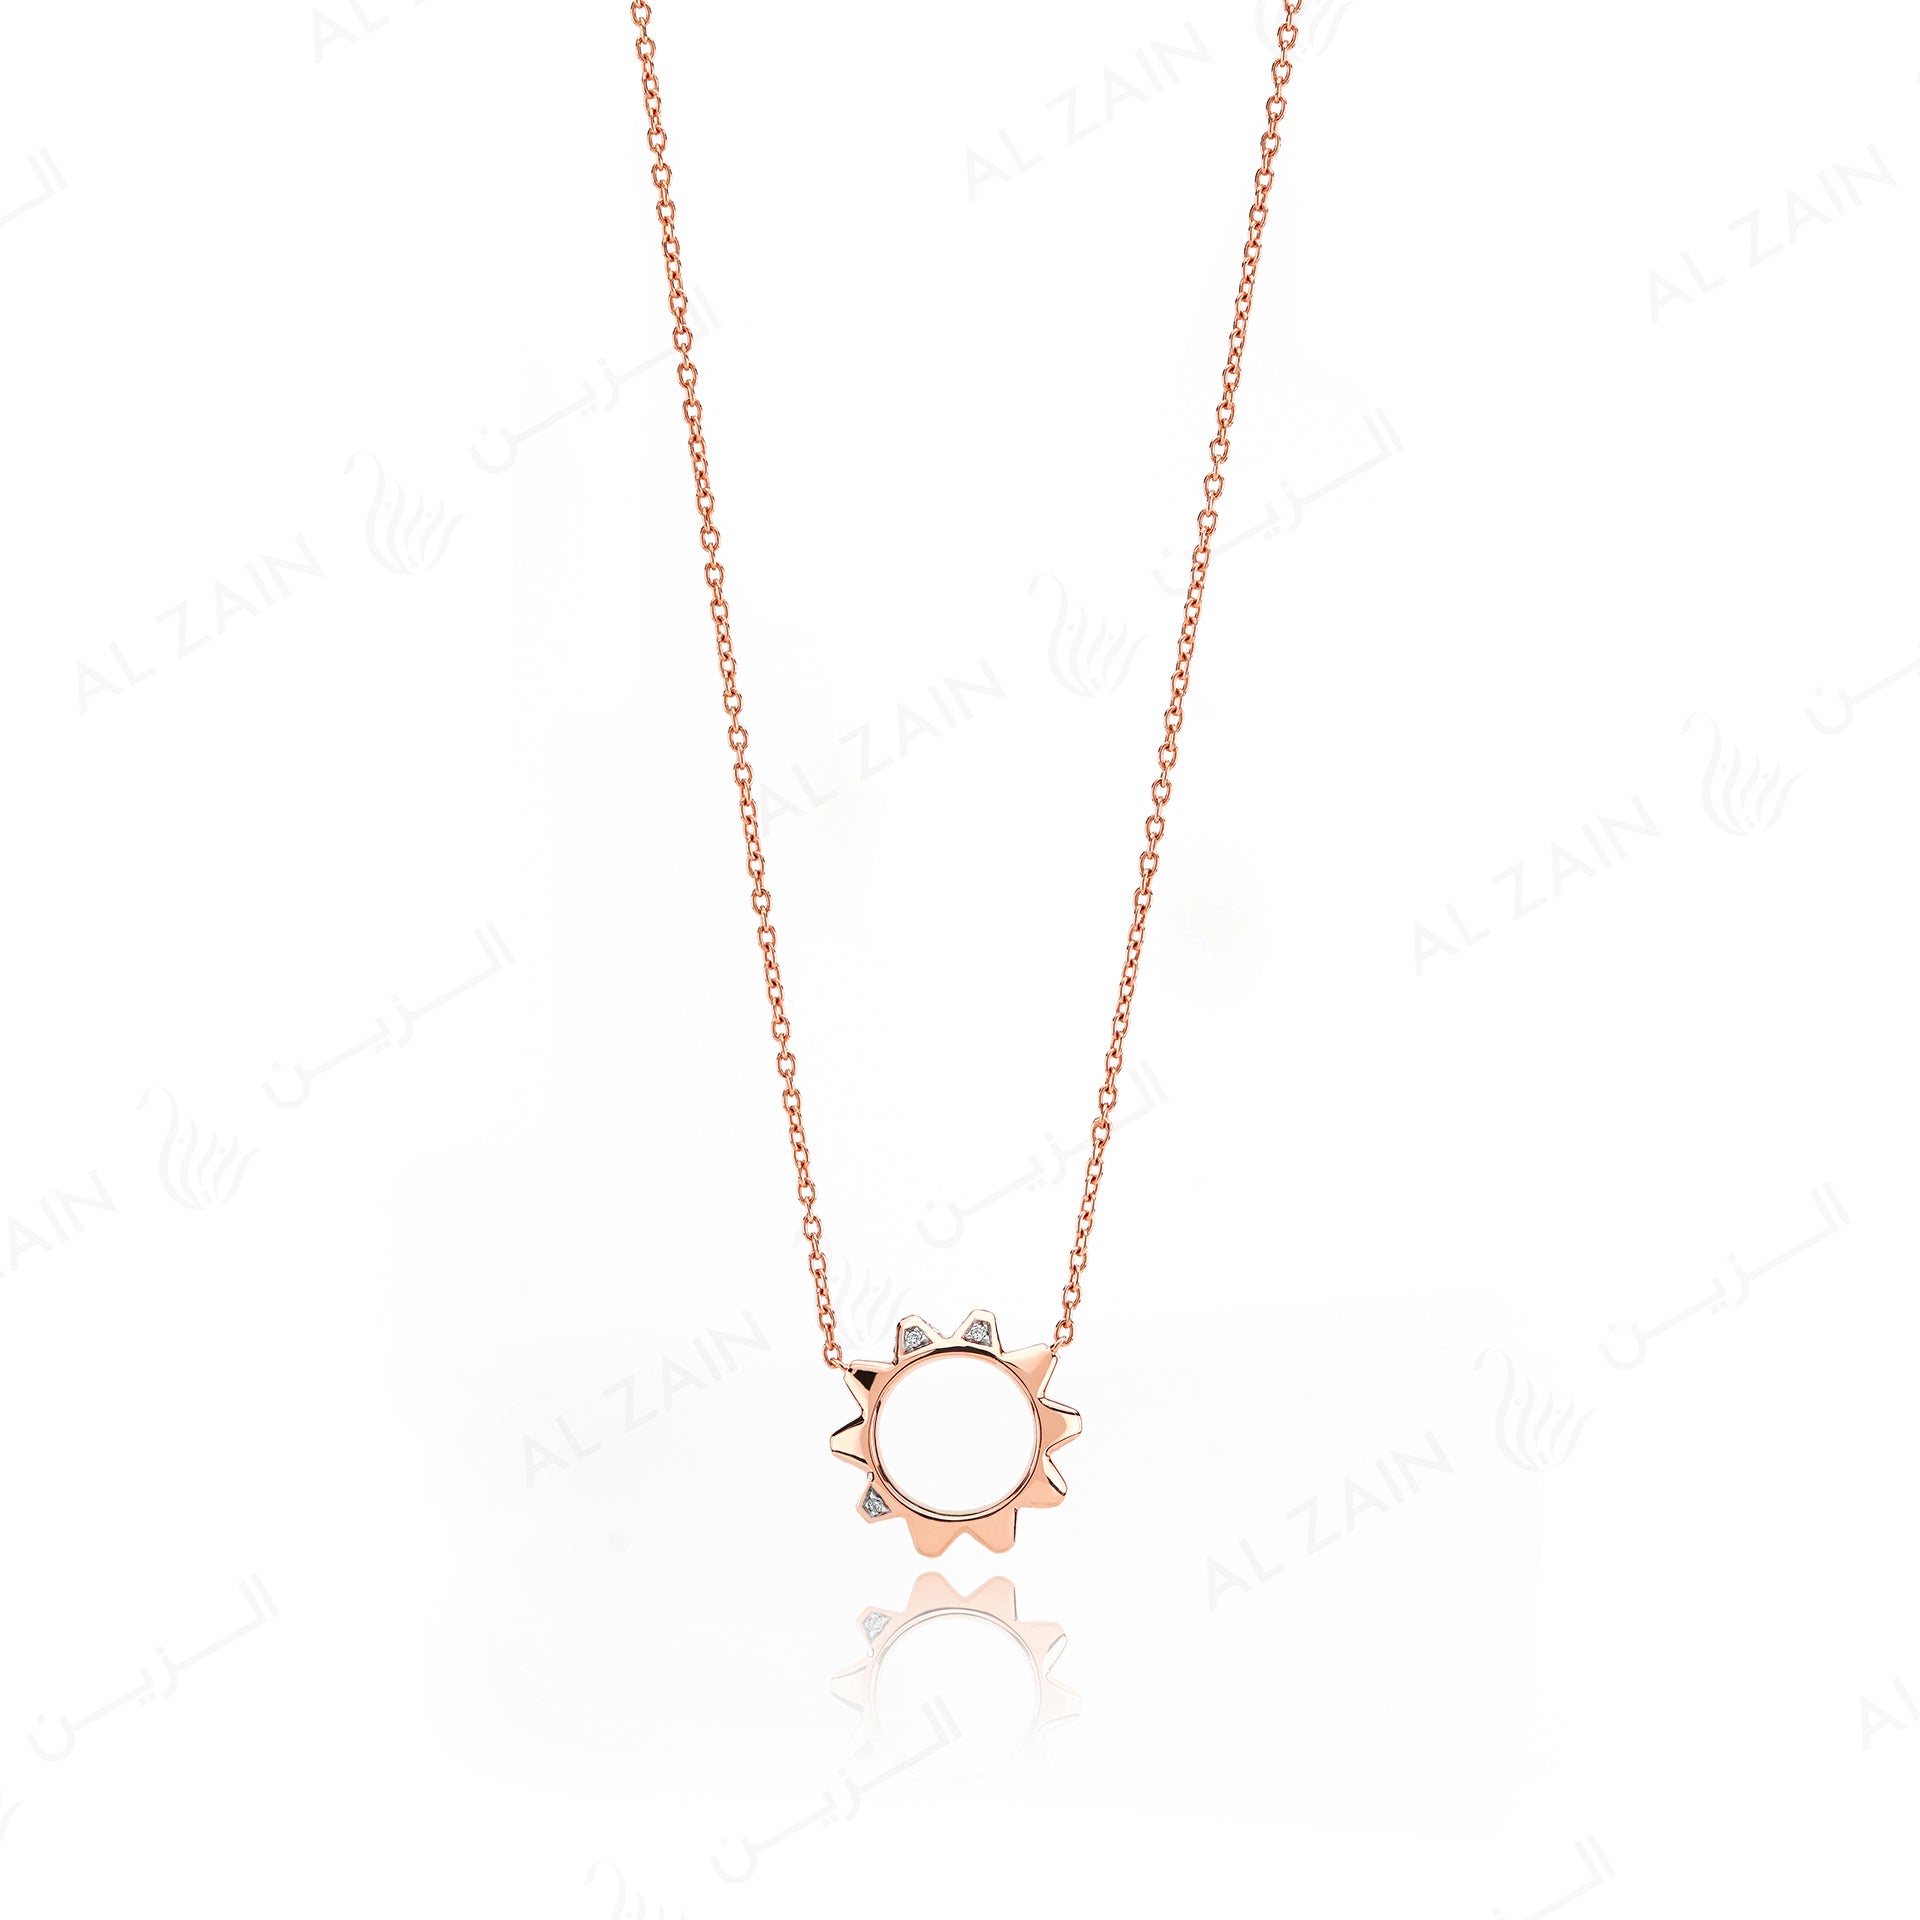 Hab El Hayl 2nd Edition Necklace in Rose Gold with Diamonds